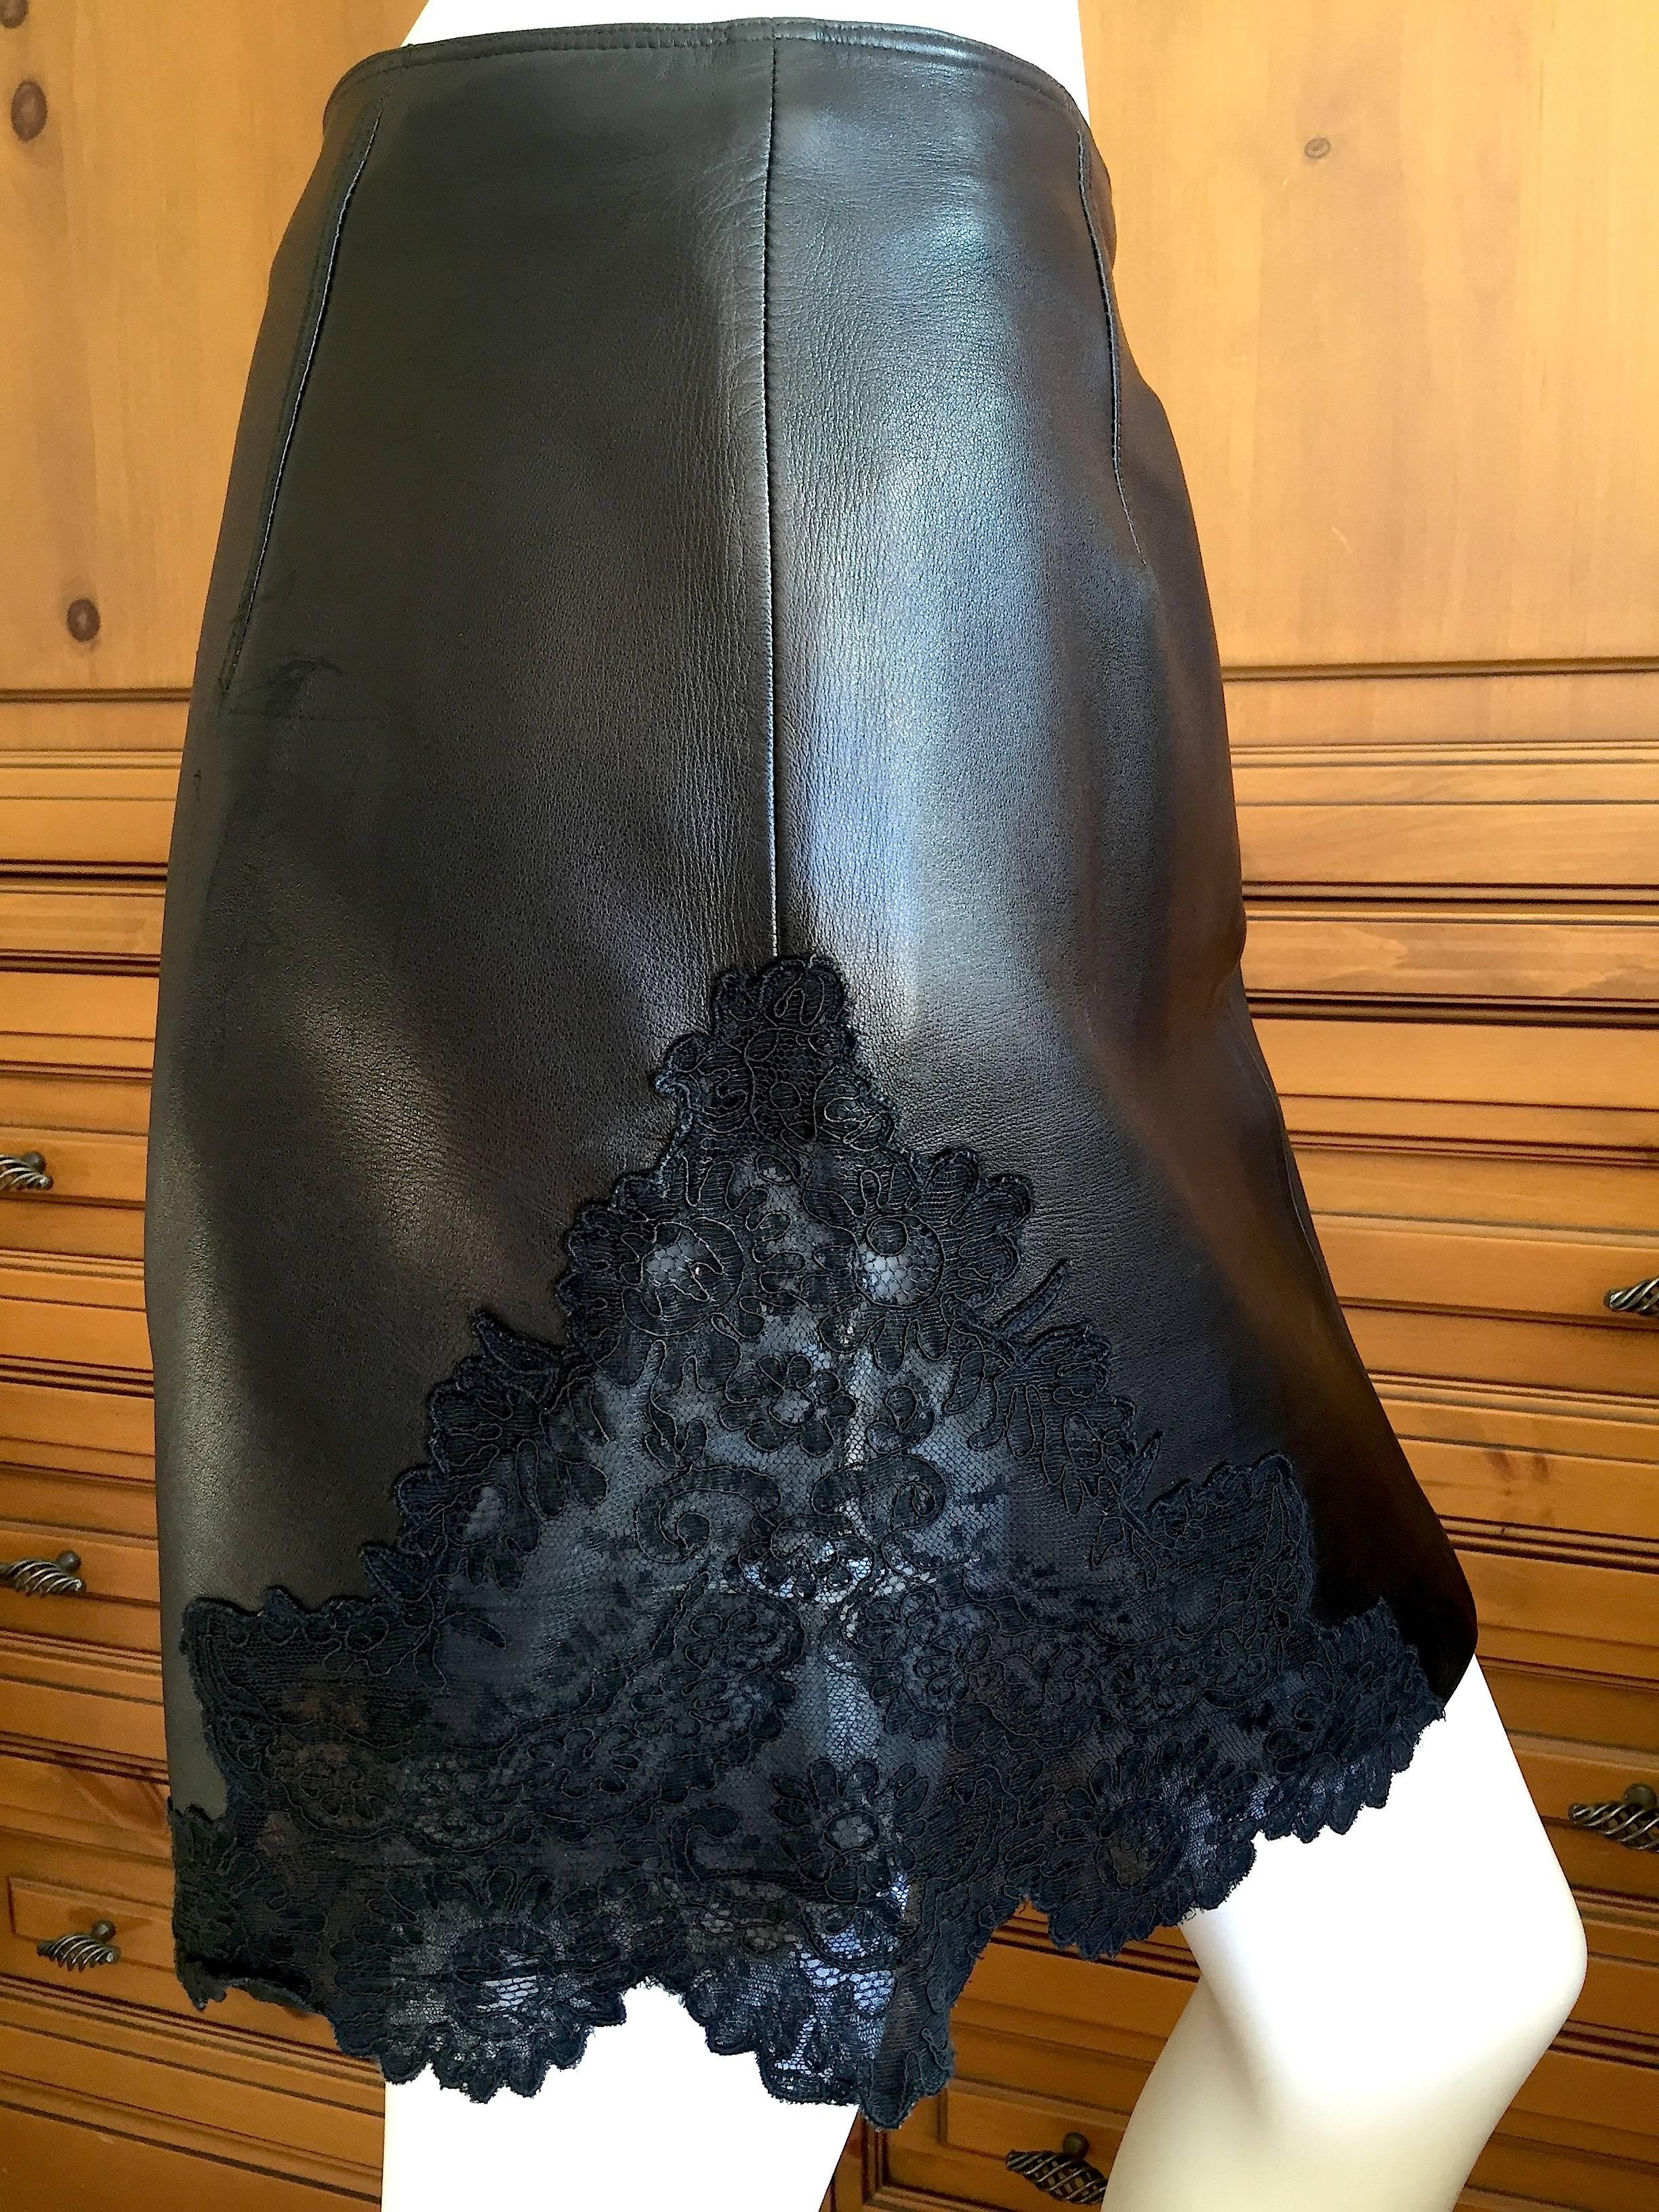 Beautiful black leather skirt with lace insert from Gianni Verscace,
Waist 29